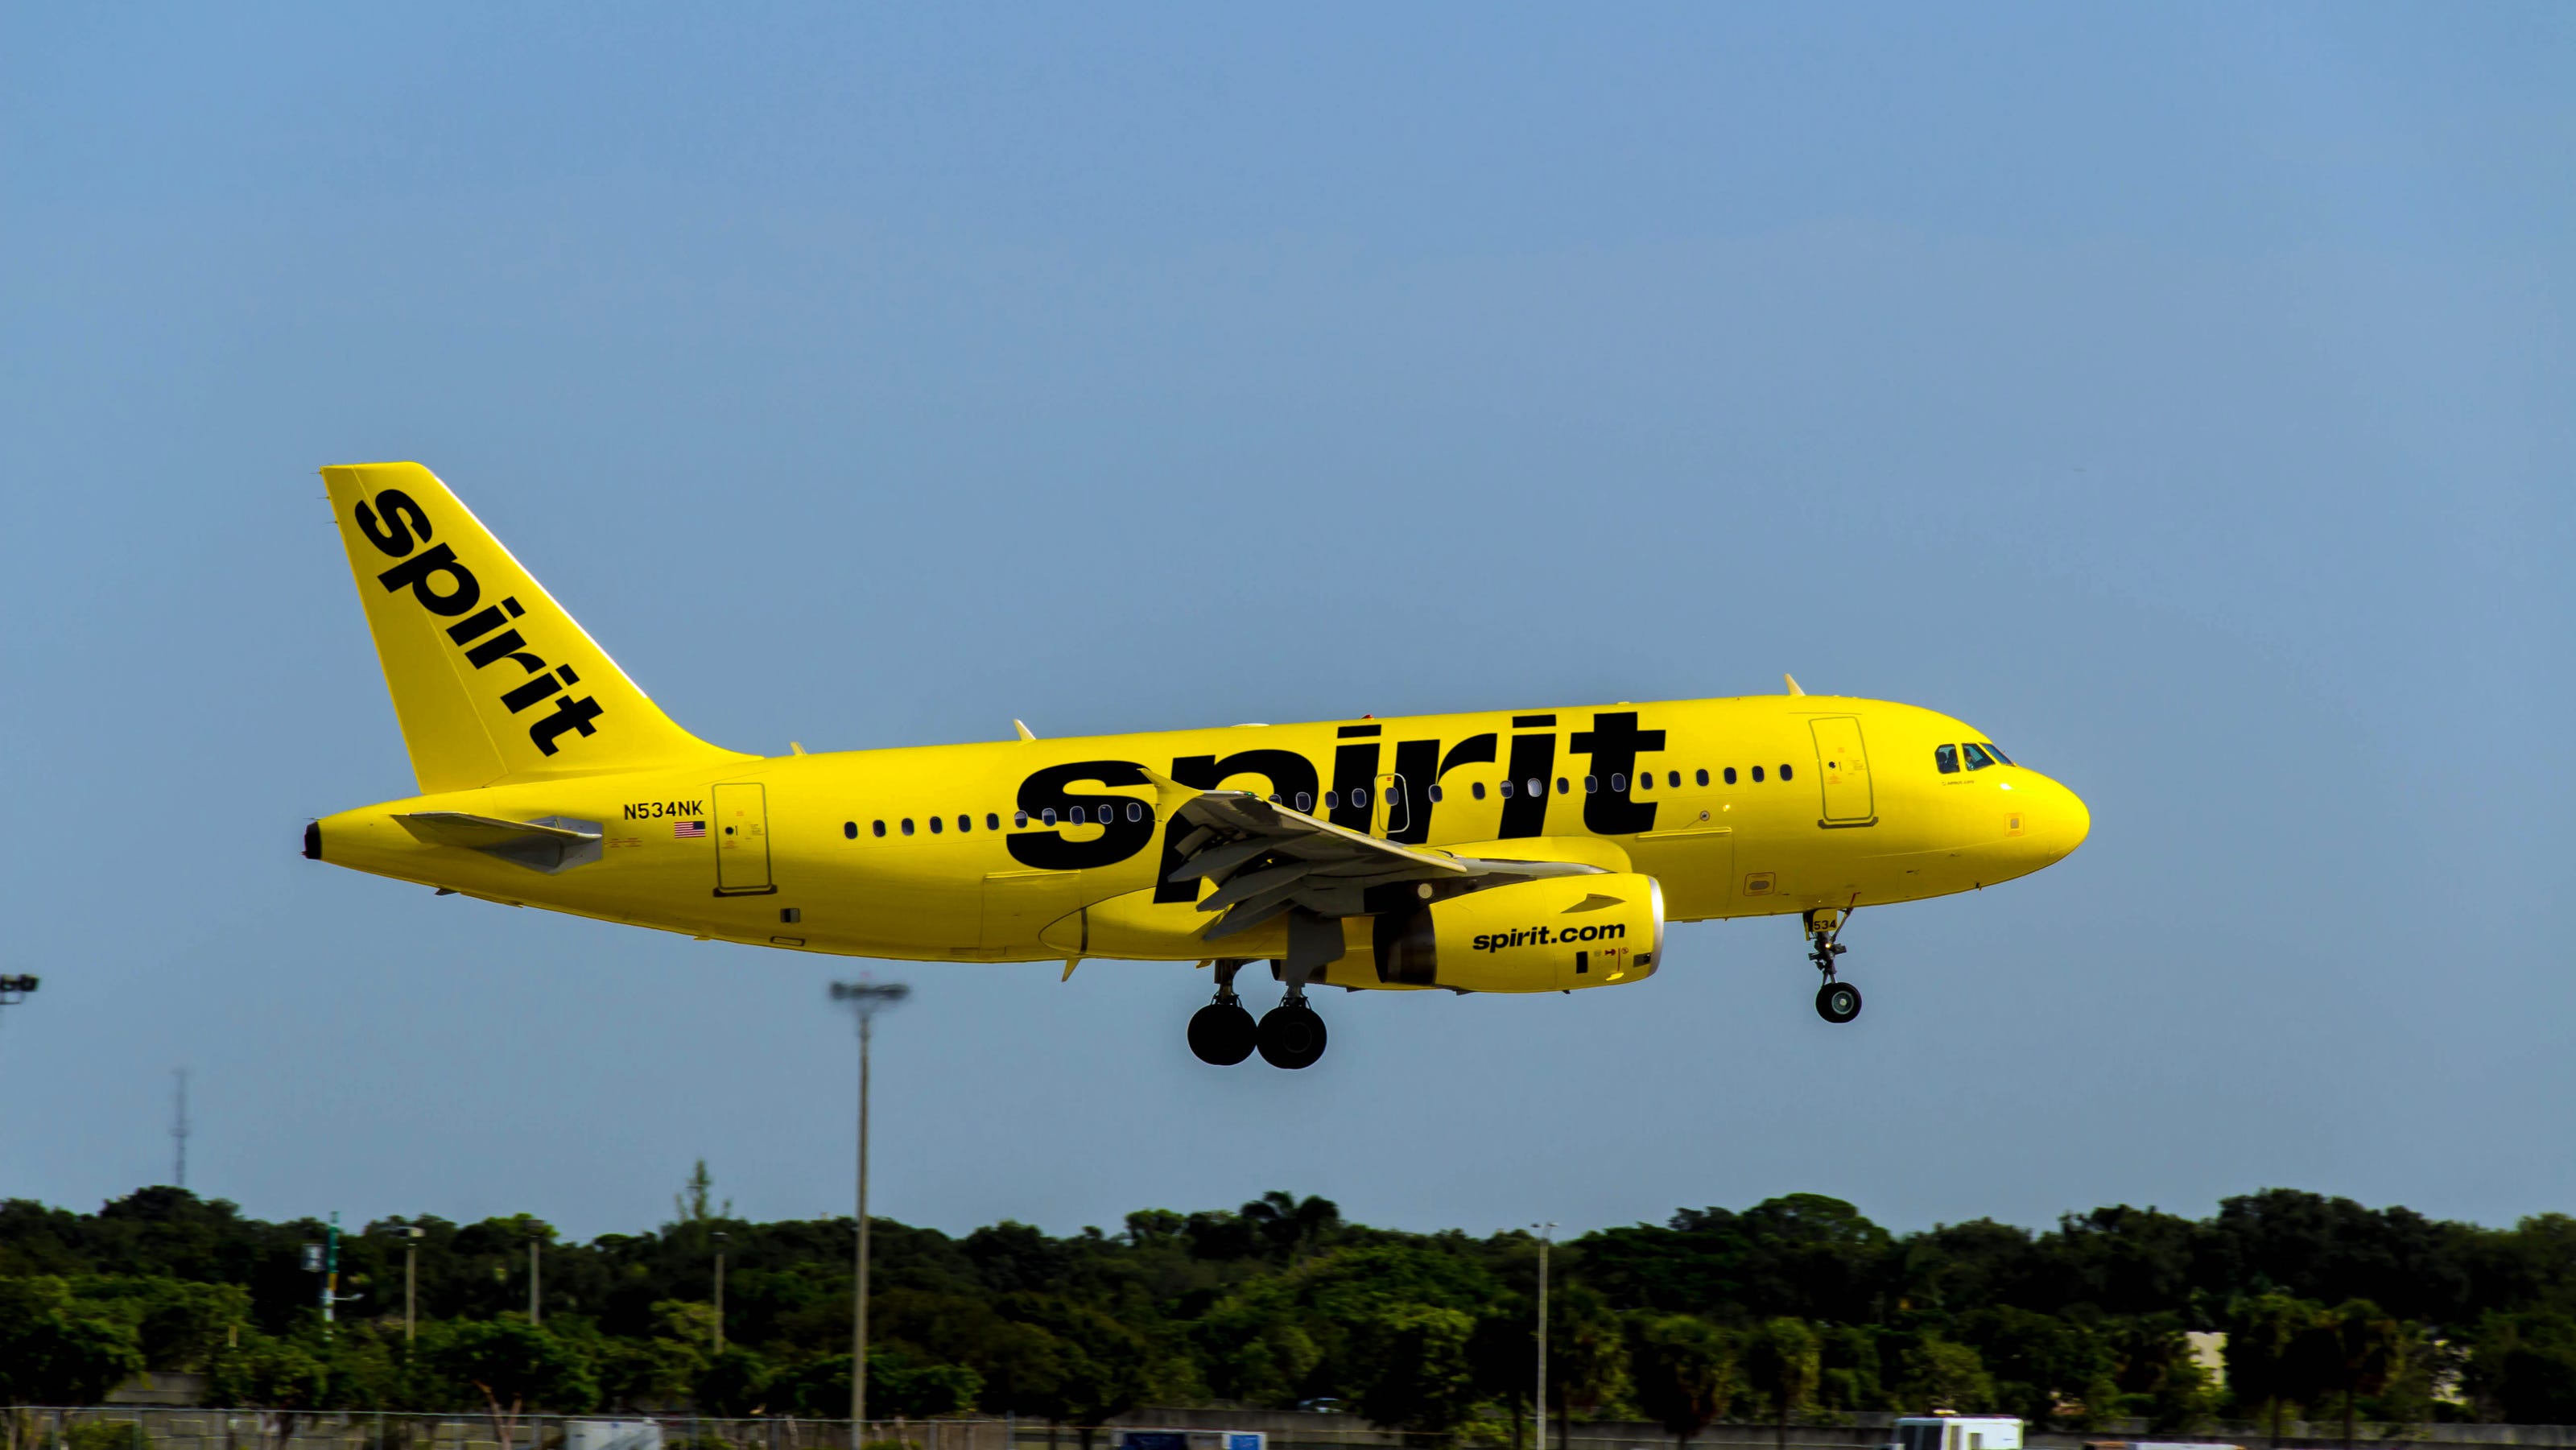 Spirit Airlines is shedding its bad reputation